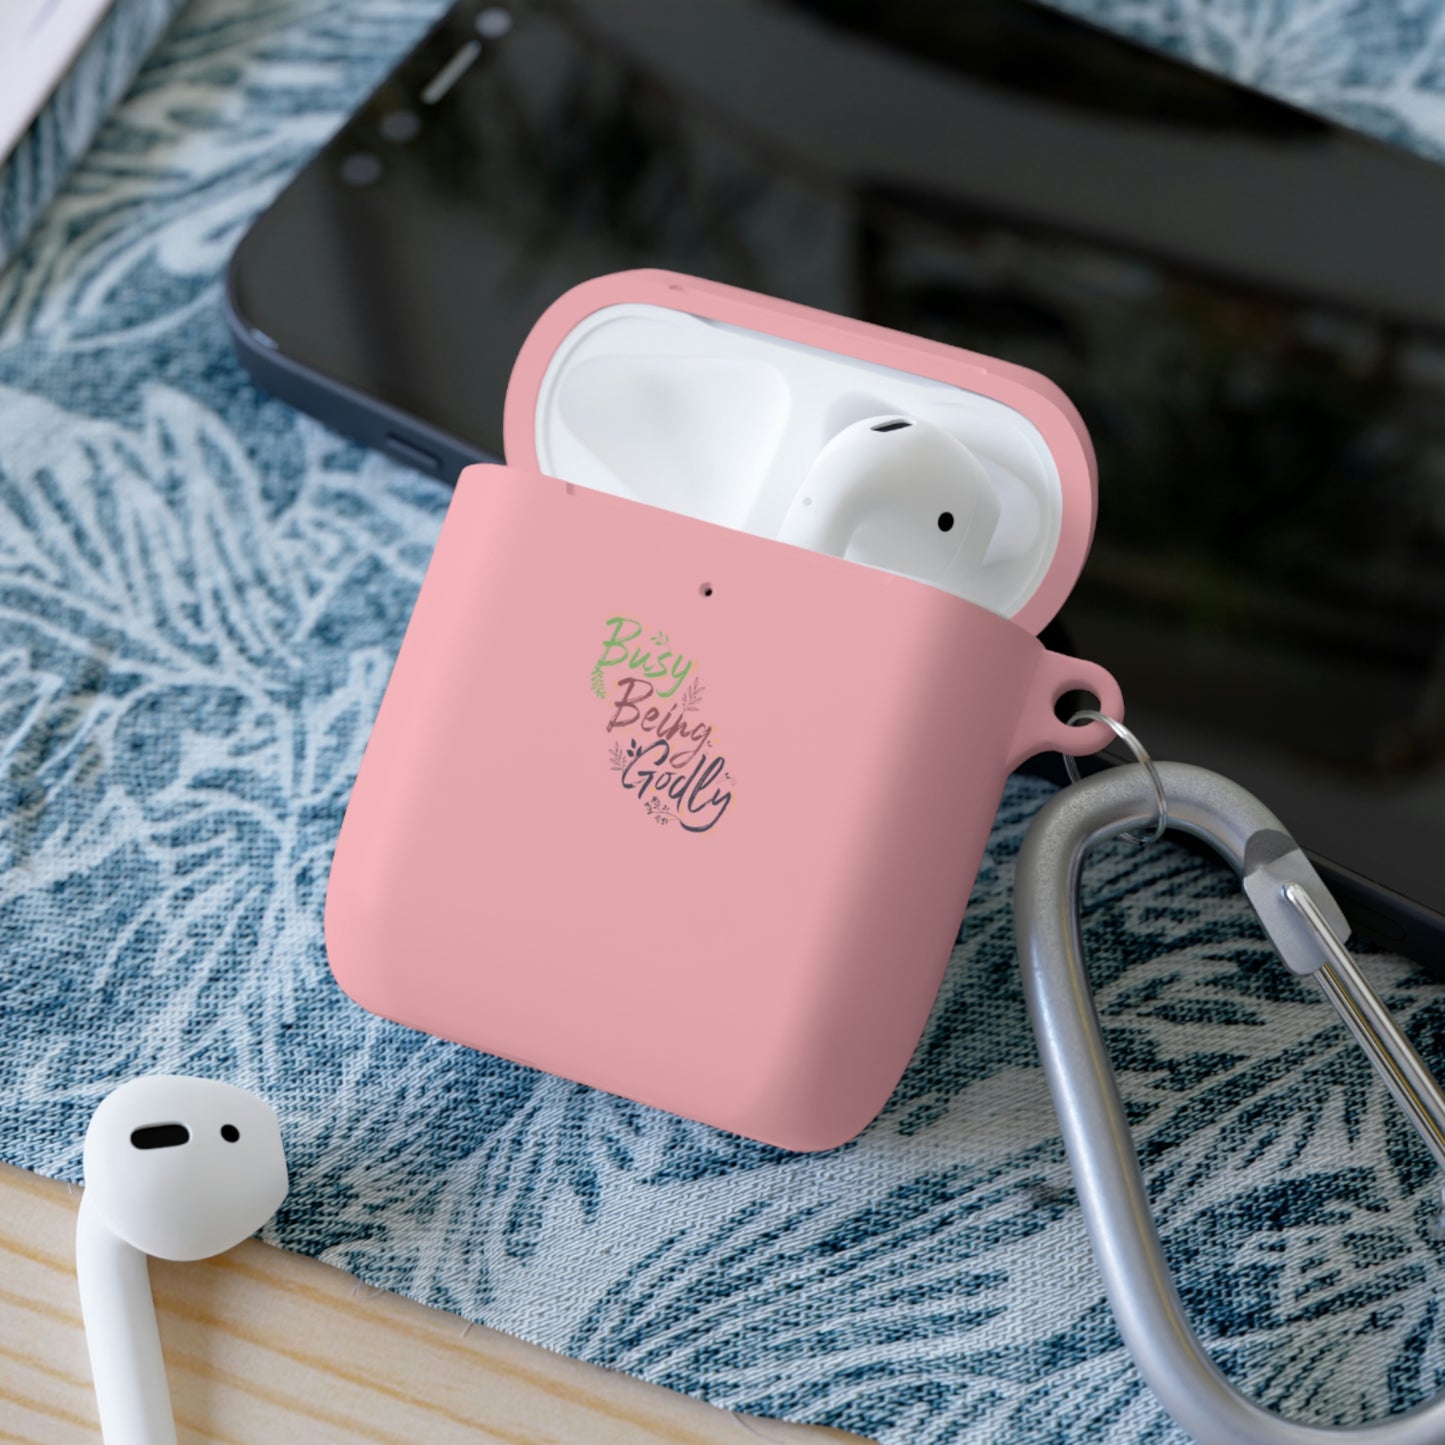 Busy Being Godly Airpods / Airpods Pro Case cover